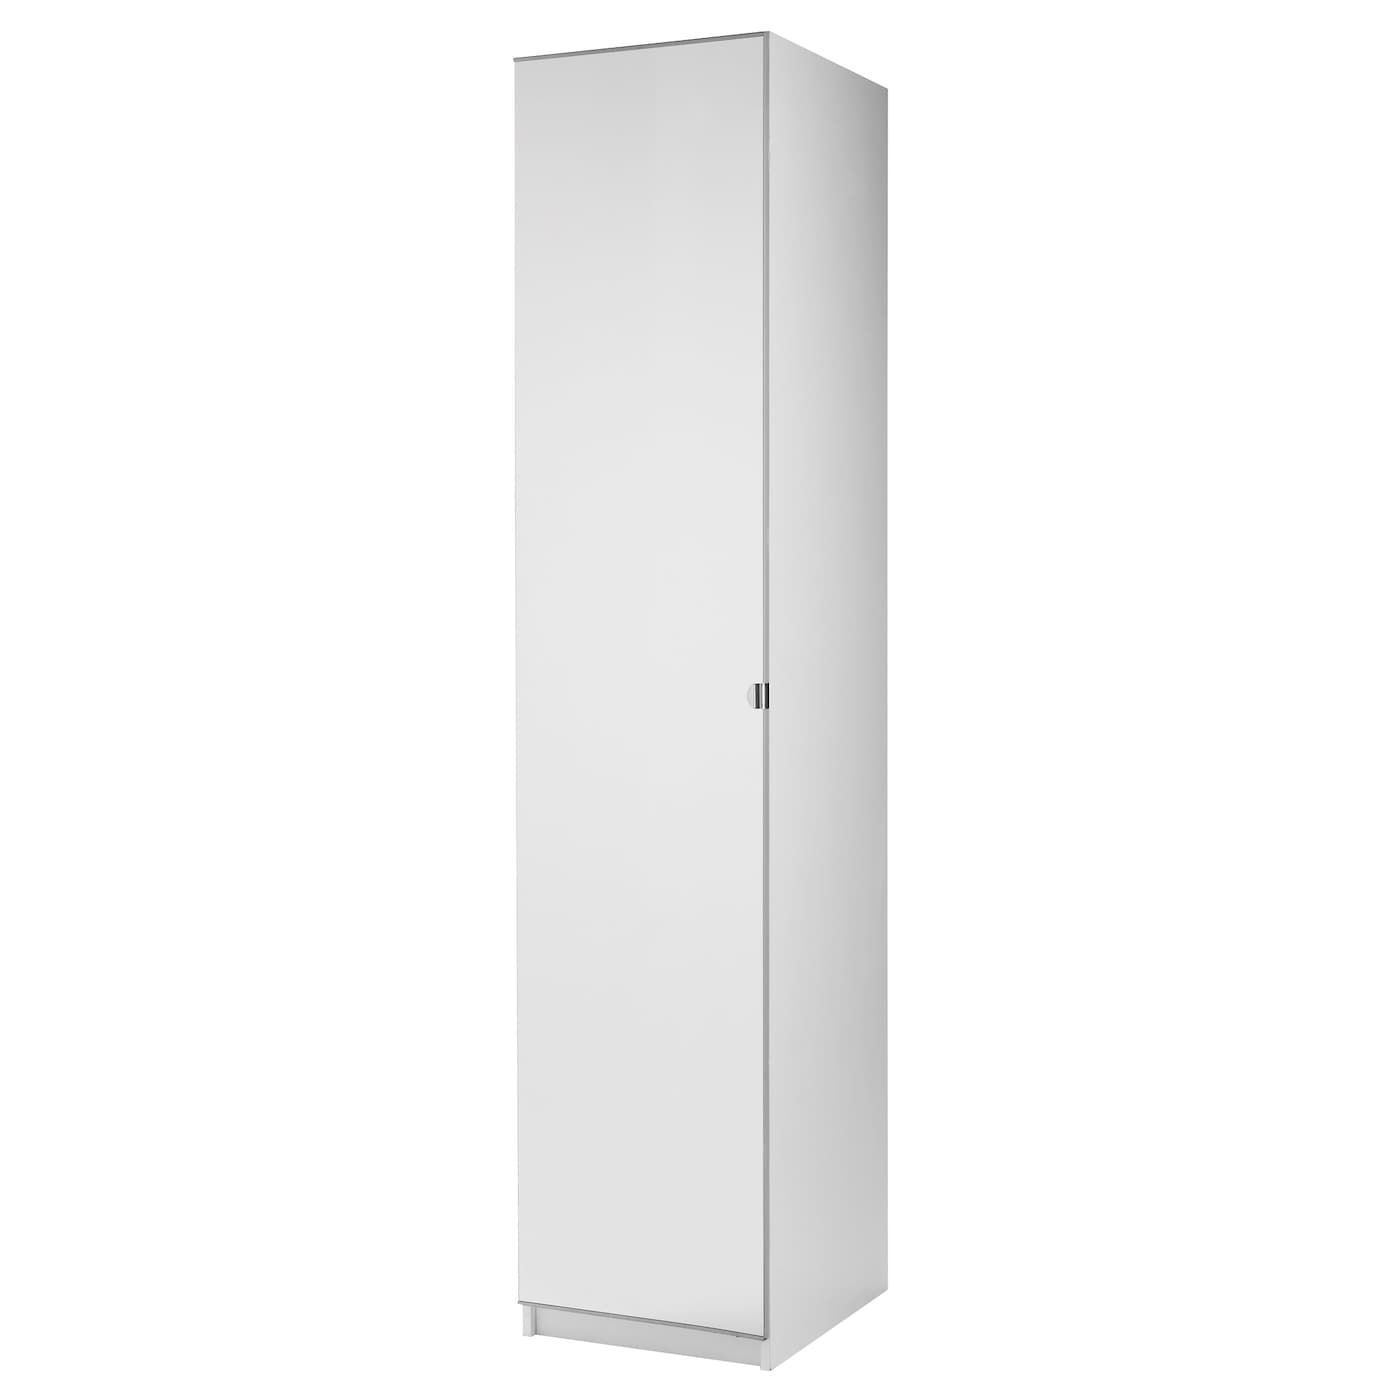 Pax / Vikedal Wardrobe With 1 Door, White/mirror Glass, 50x60x236 Cm – Ikea In One Door Mirrored Wardrobes (View 3 of 15)